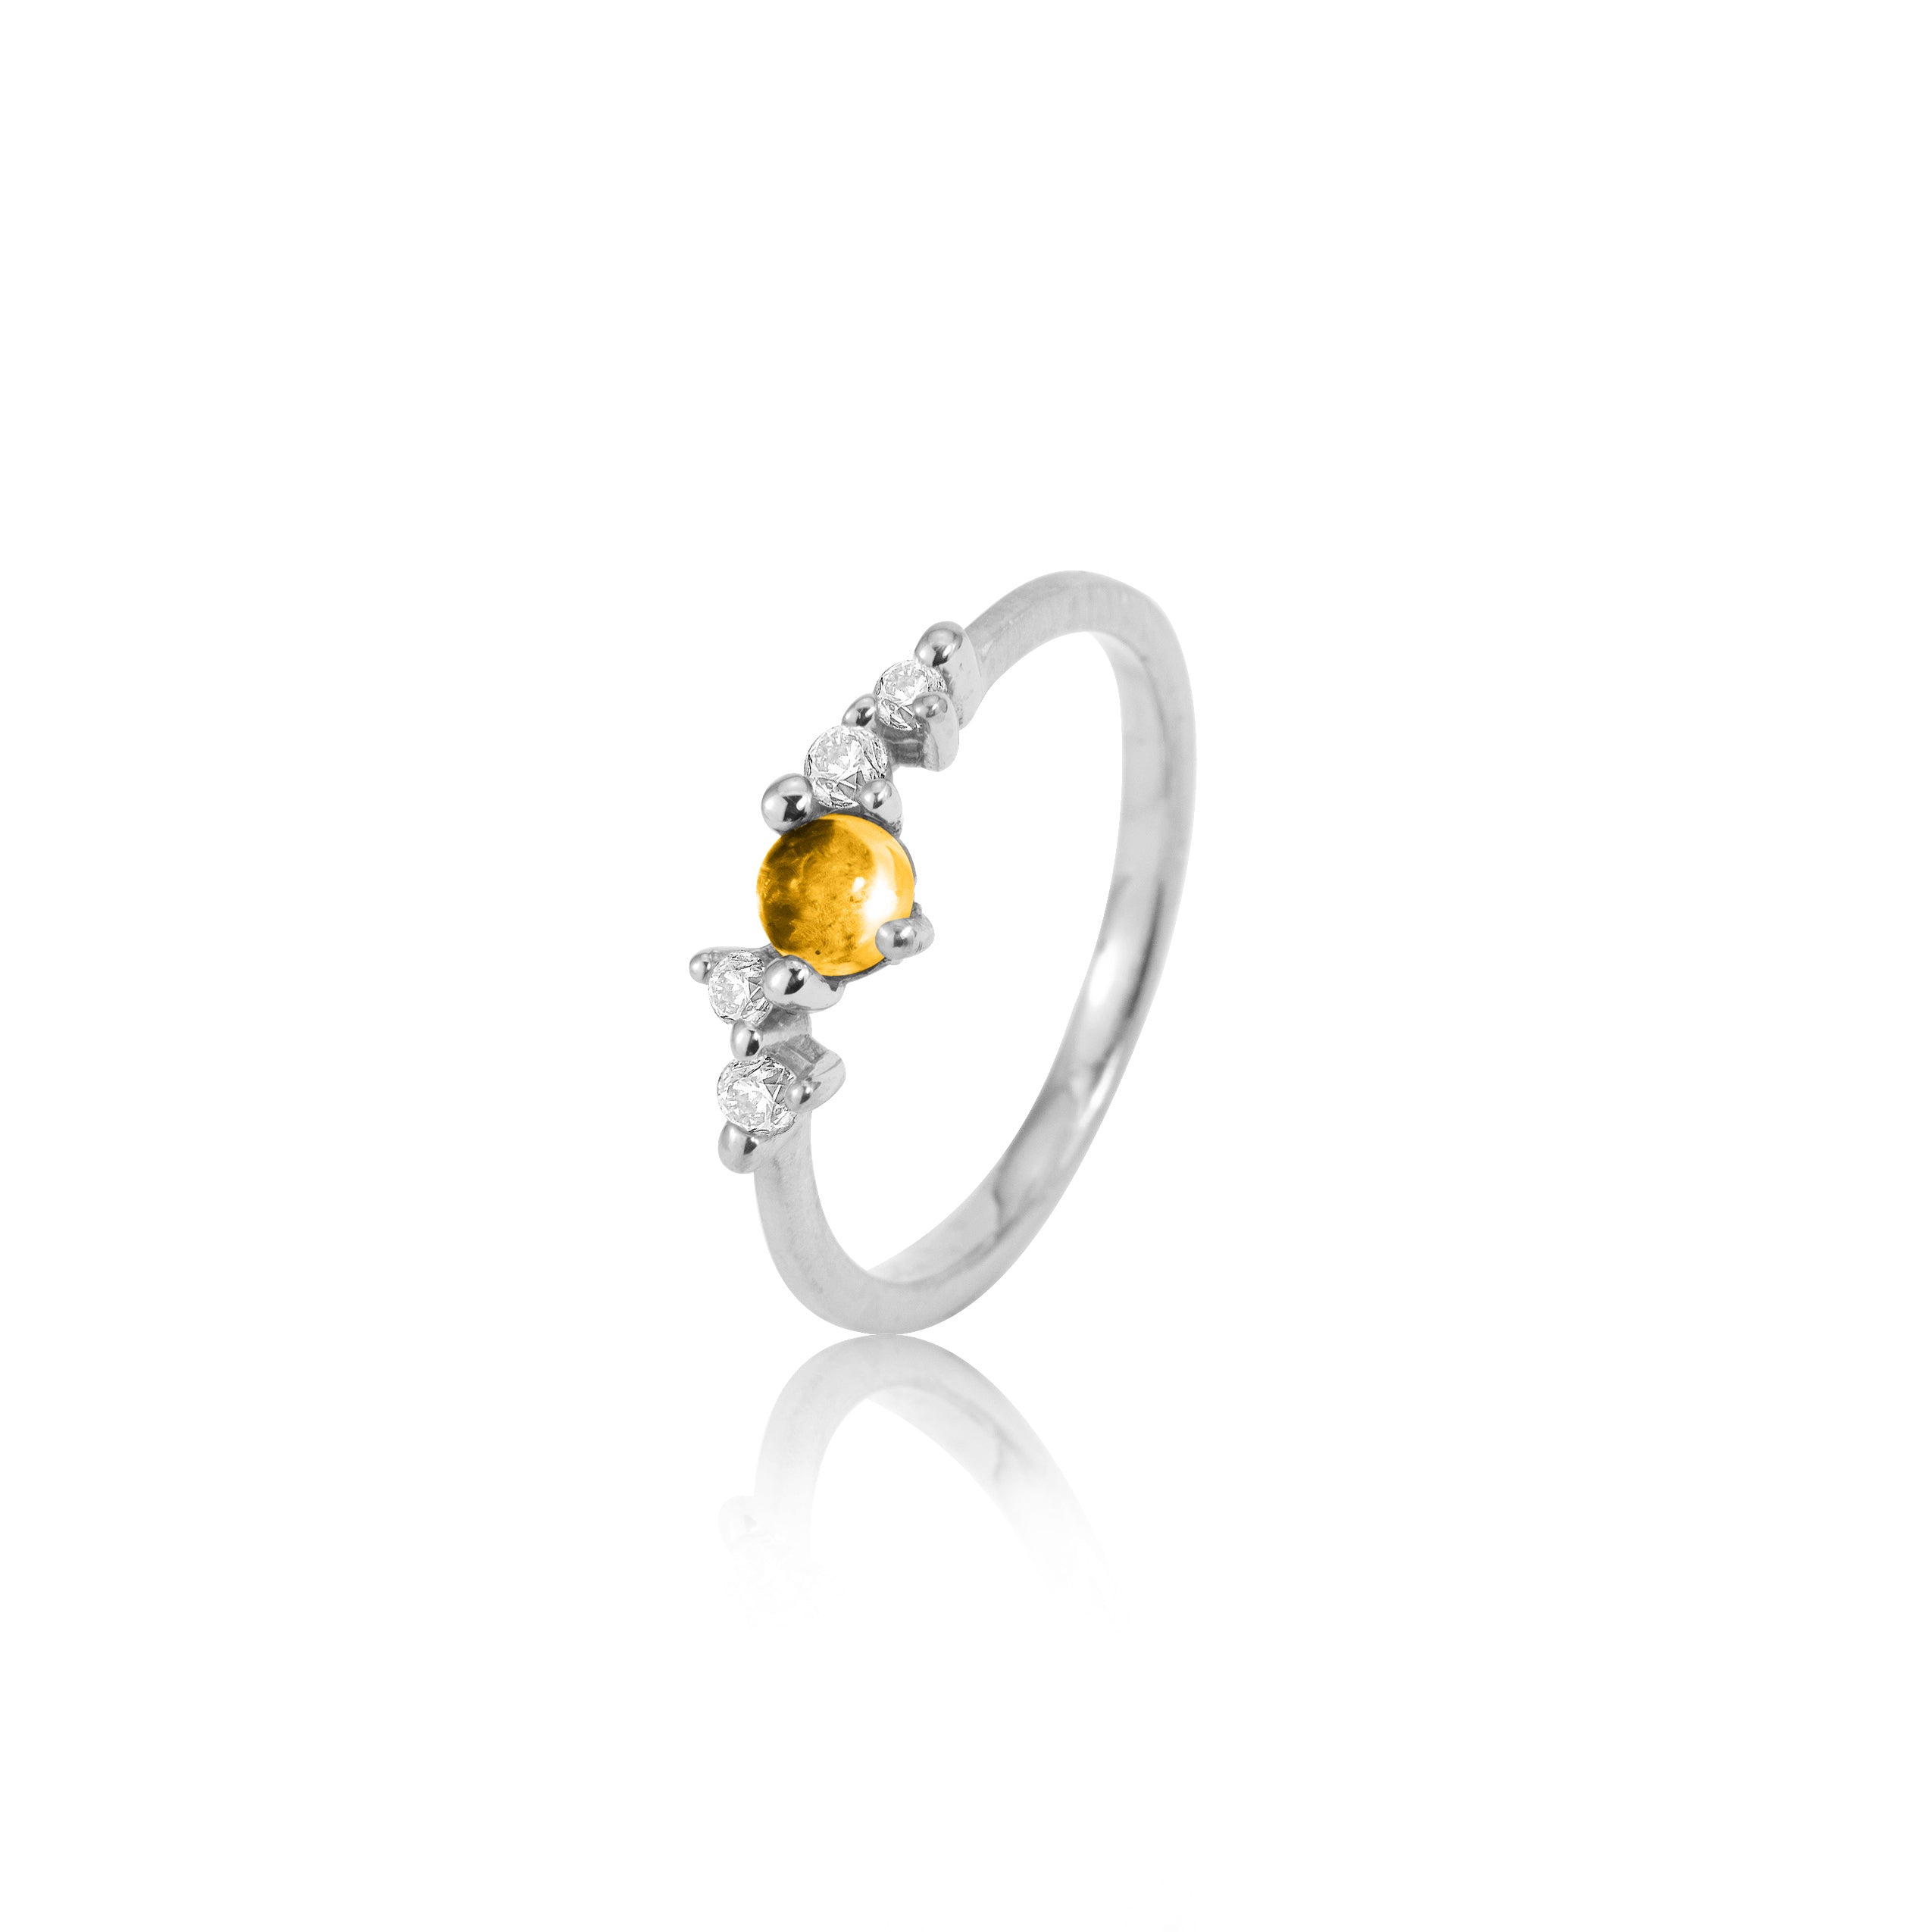 Stellini ring "smal" in 585 gold with citrine